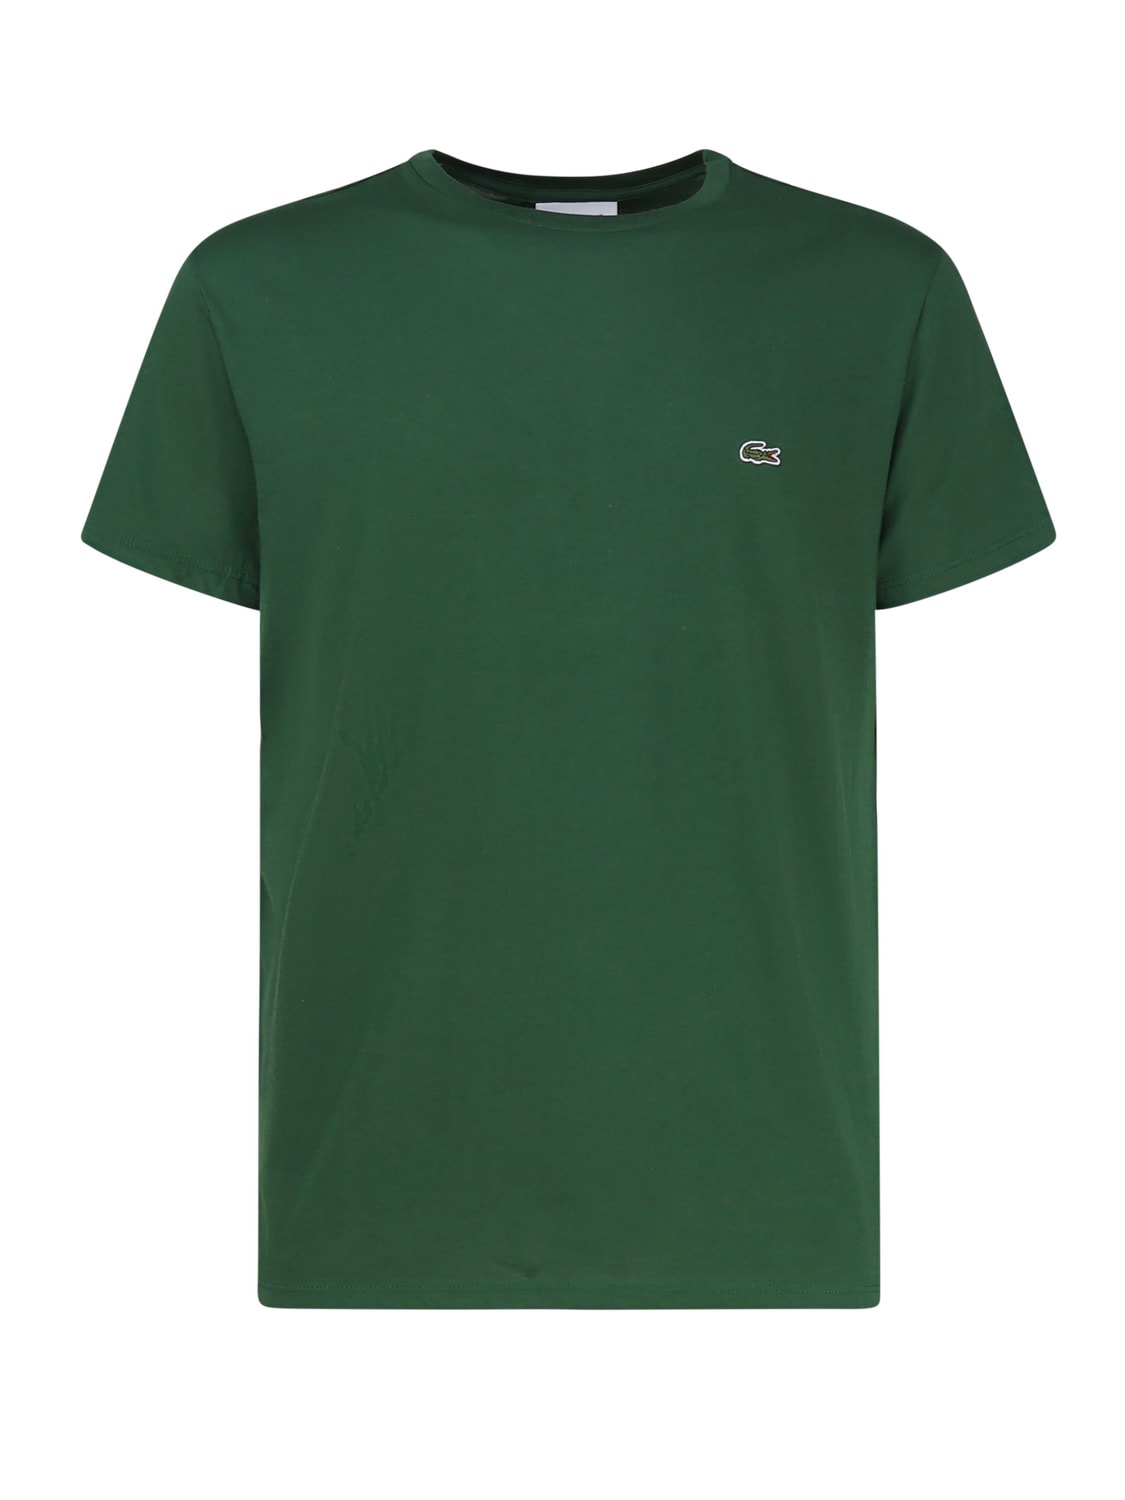 Green T-shirt In Cotton Jersey